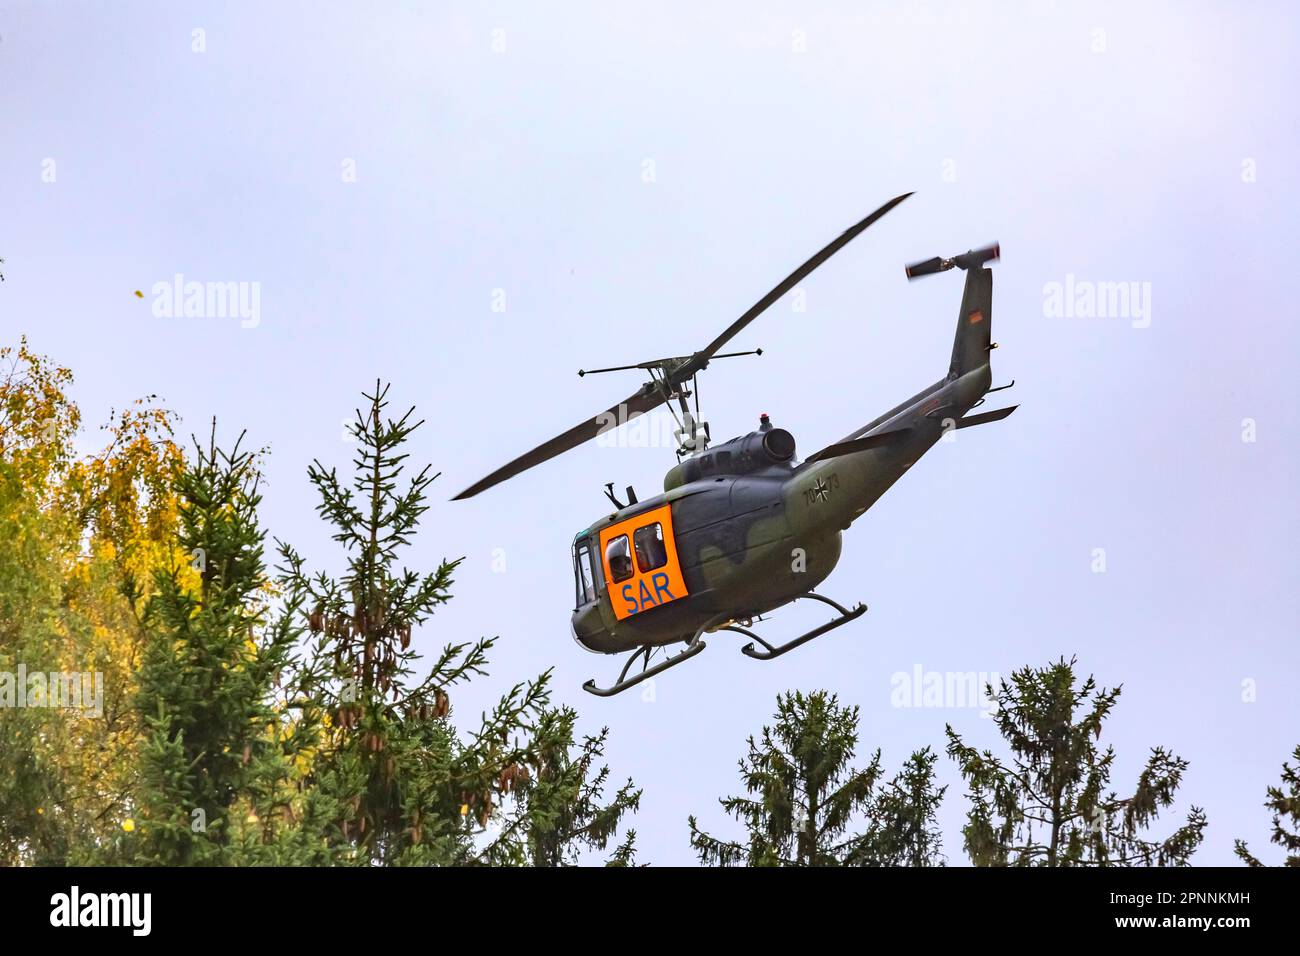 SAR helicopter of the type Bell UH-1D of the German Armed Forces, BWTEX exercise on the military training area, Stetten am kalten Markt Stock Photo